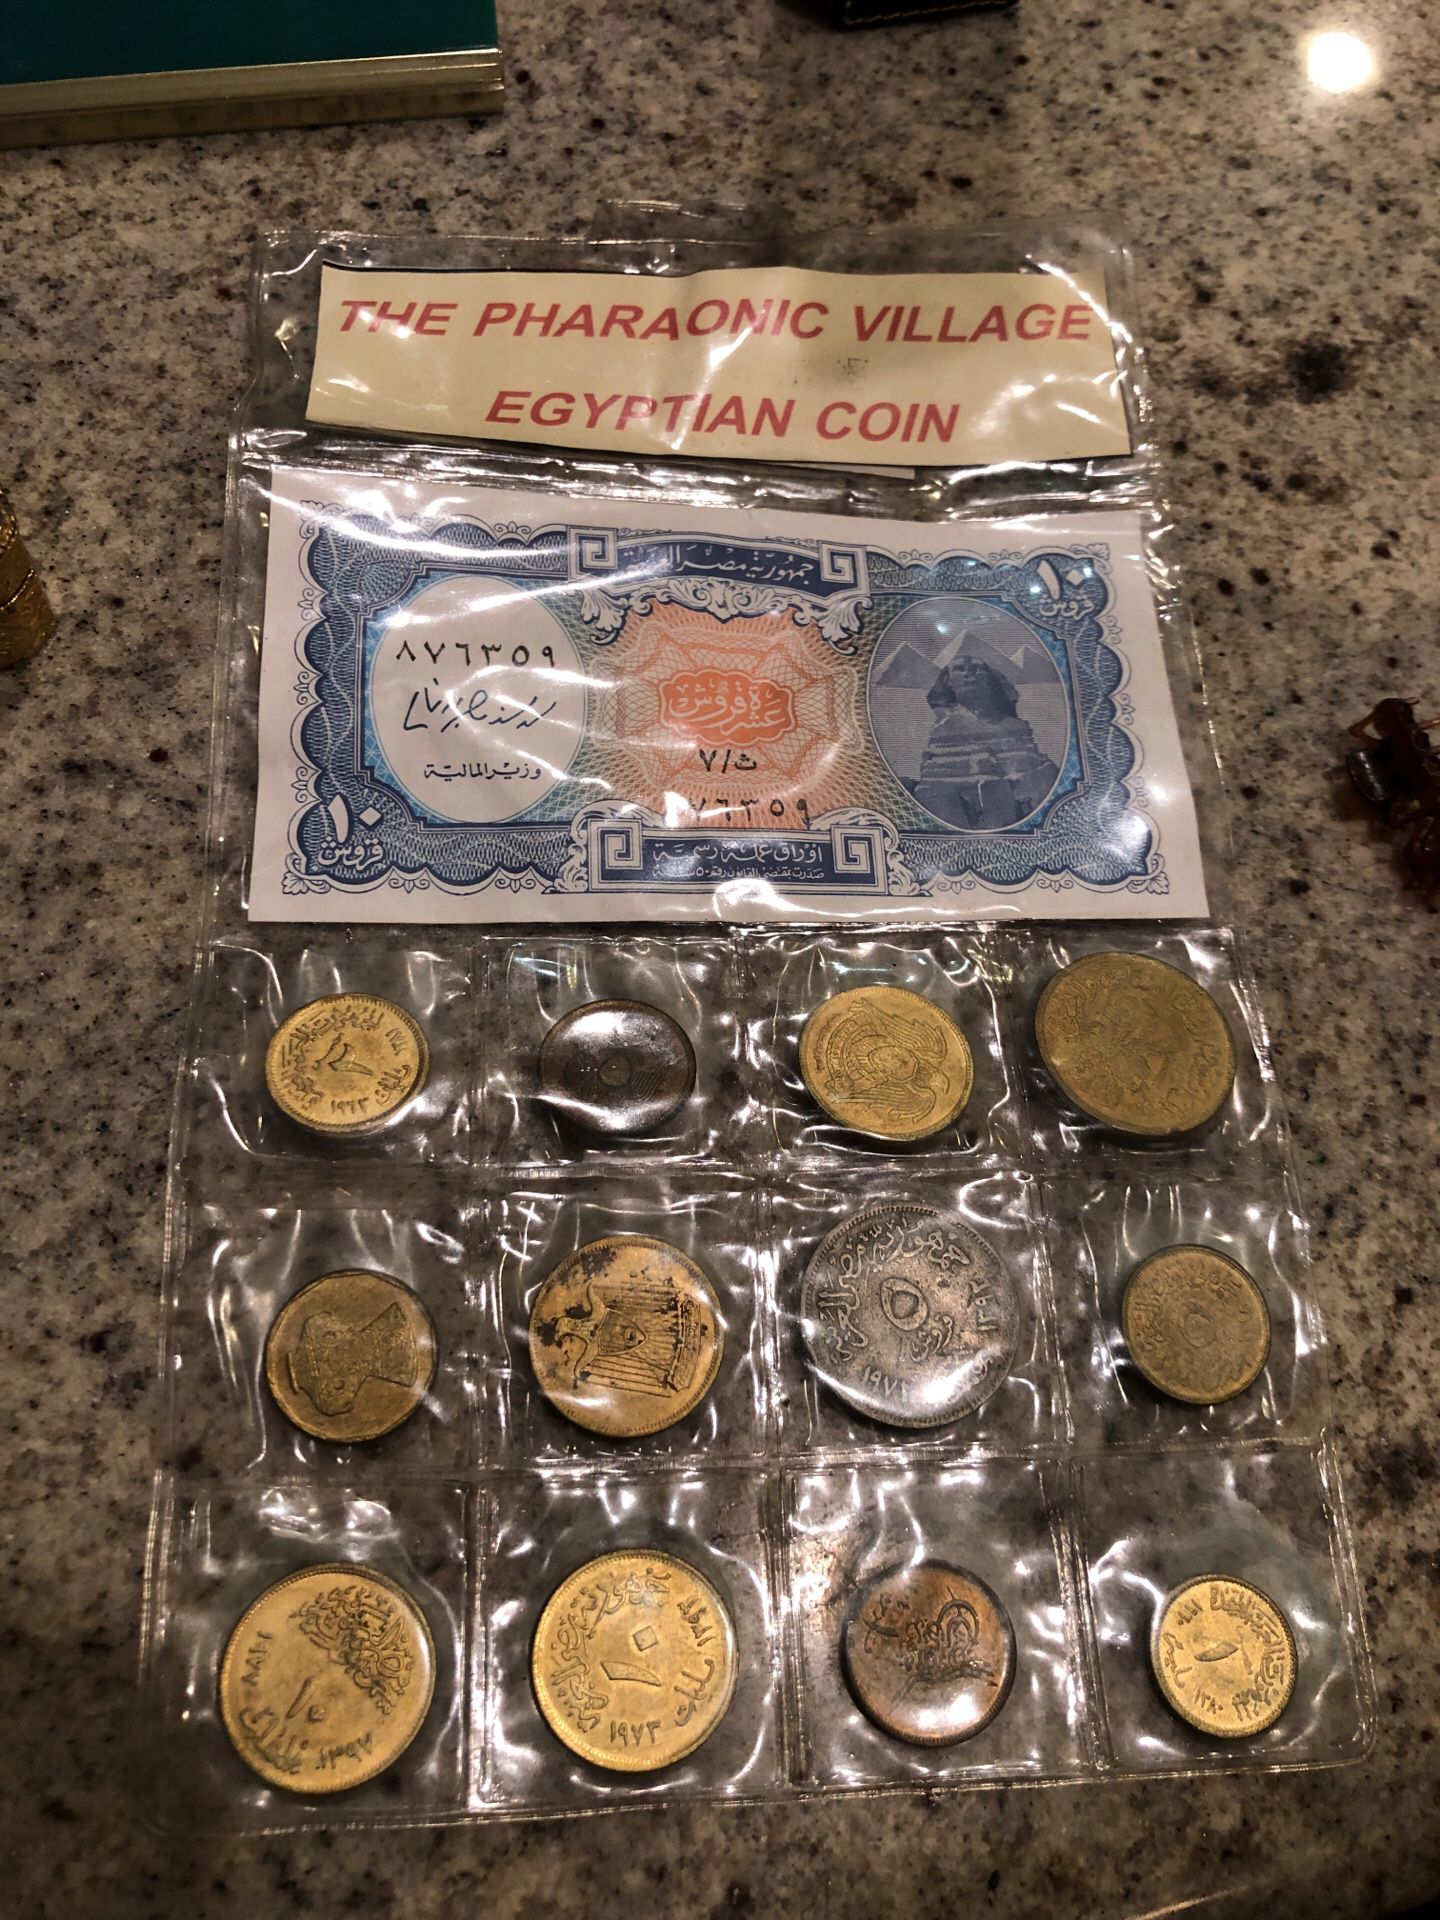 Arab republic of Egypt currency note and coins Pharaonic village Egyptian coin set